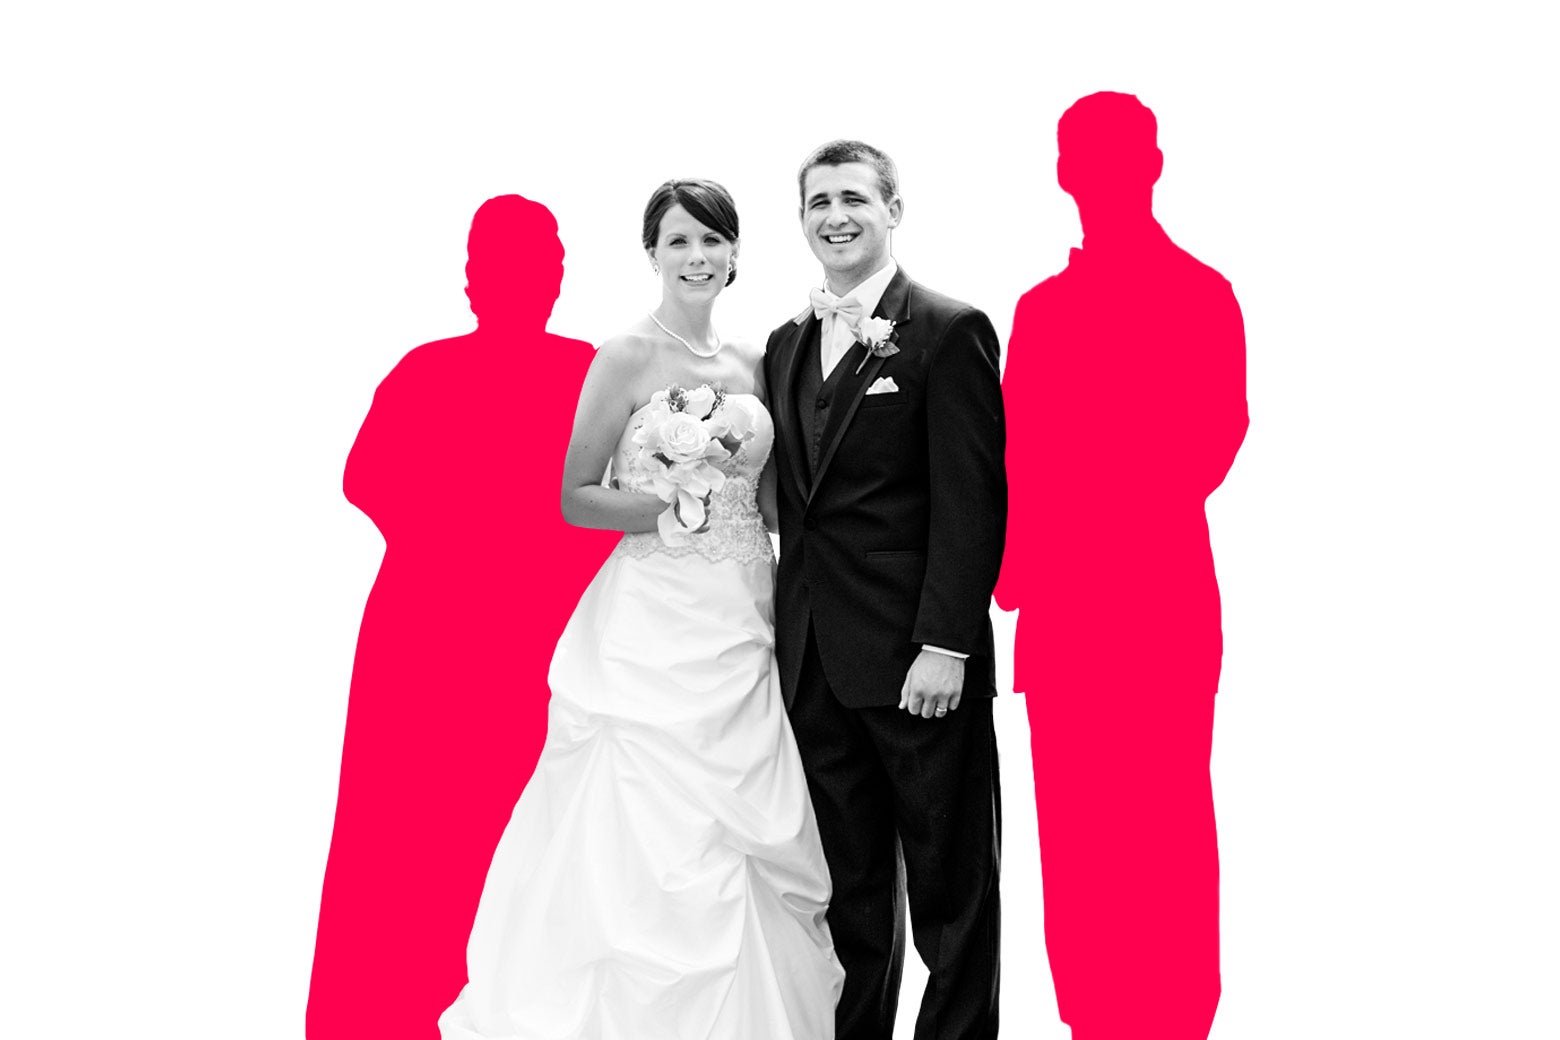 Bride and groom standing side by side with two people standing next to them on either side.